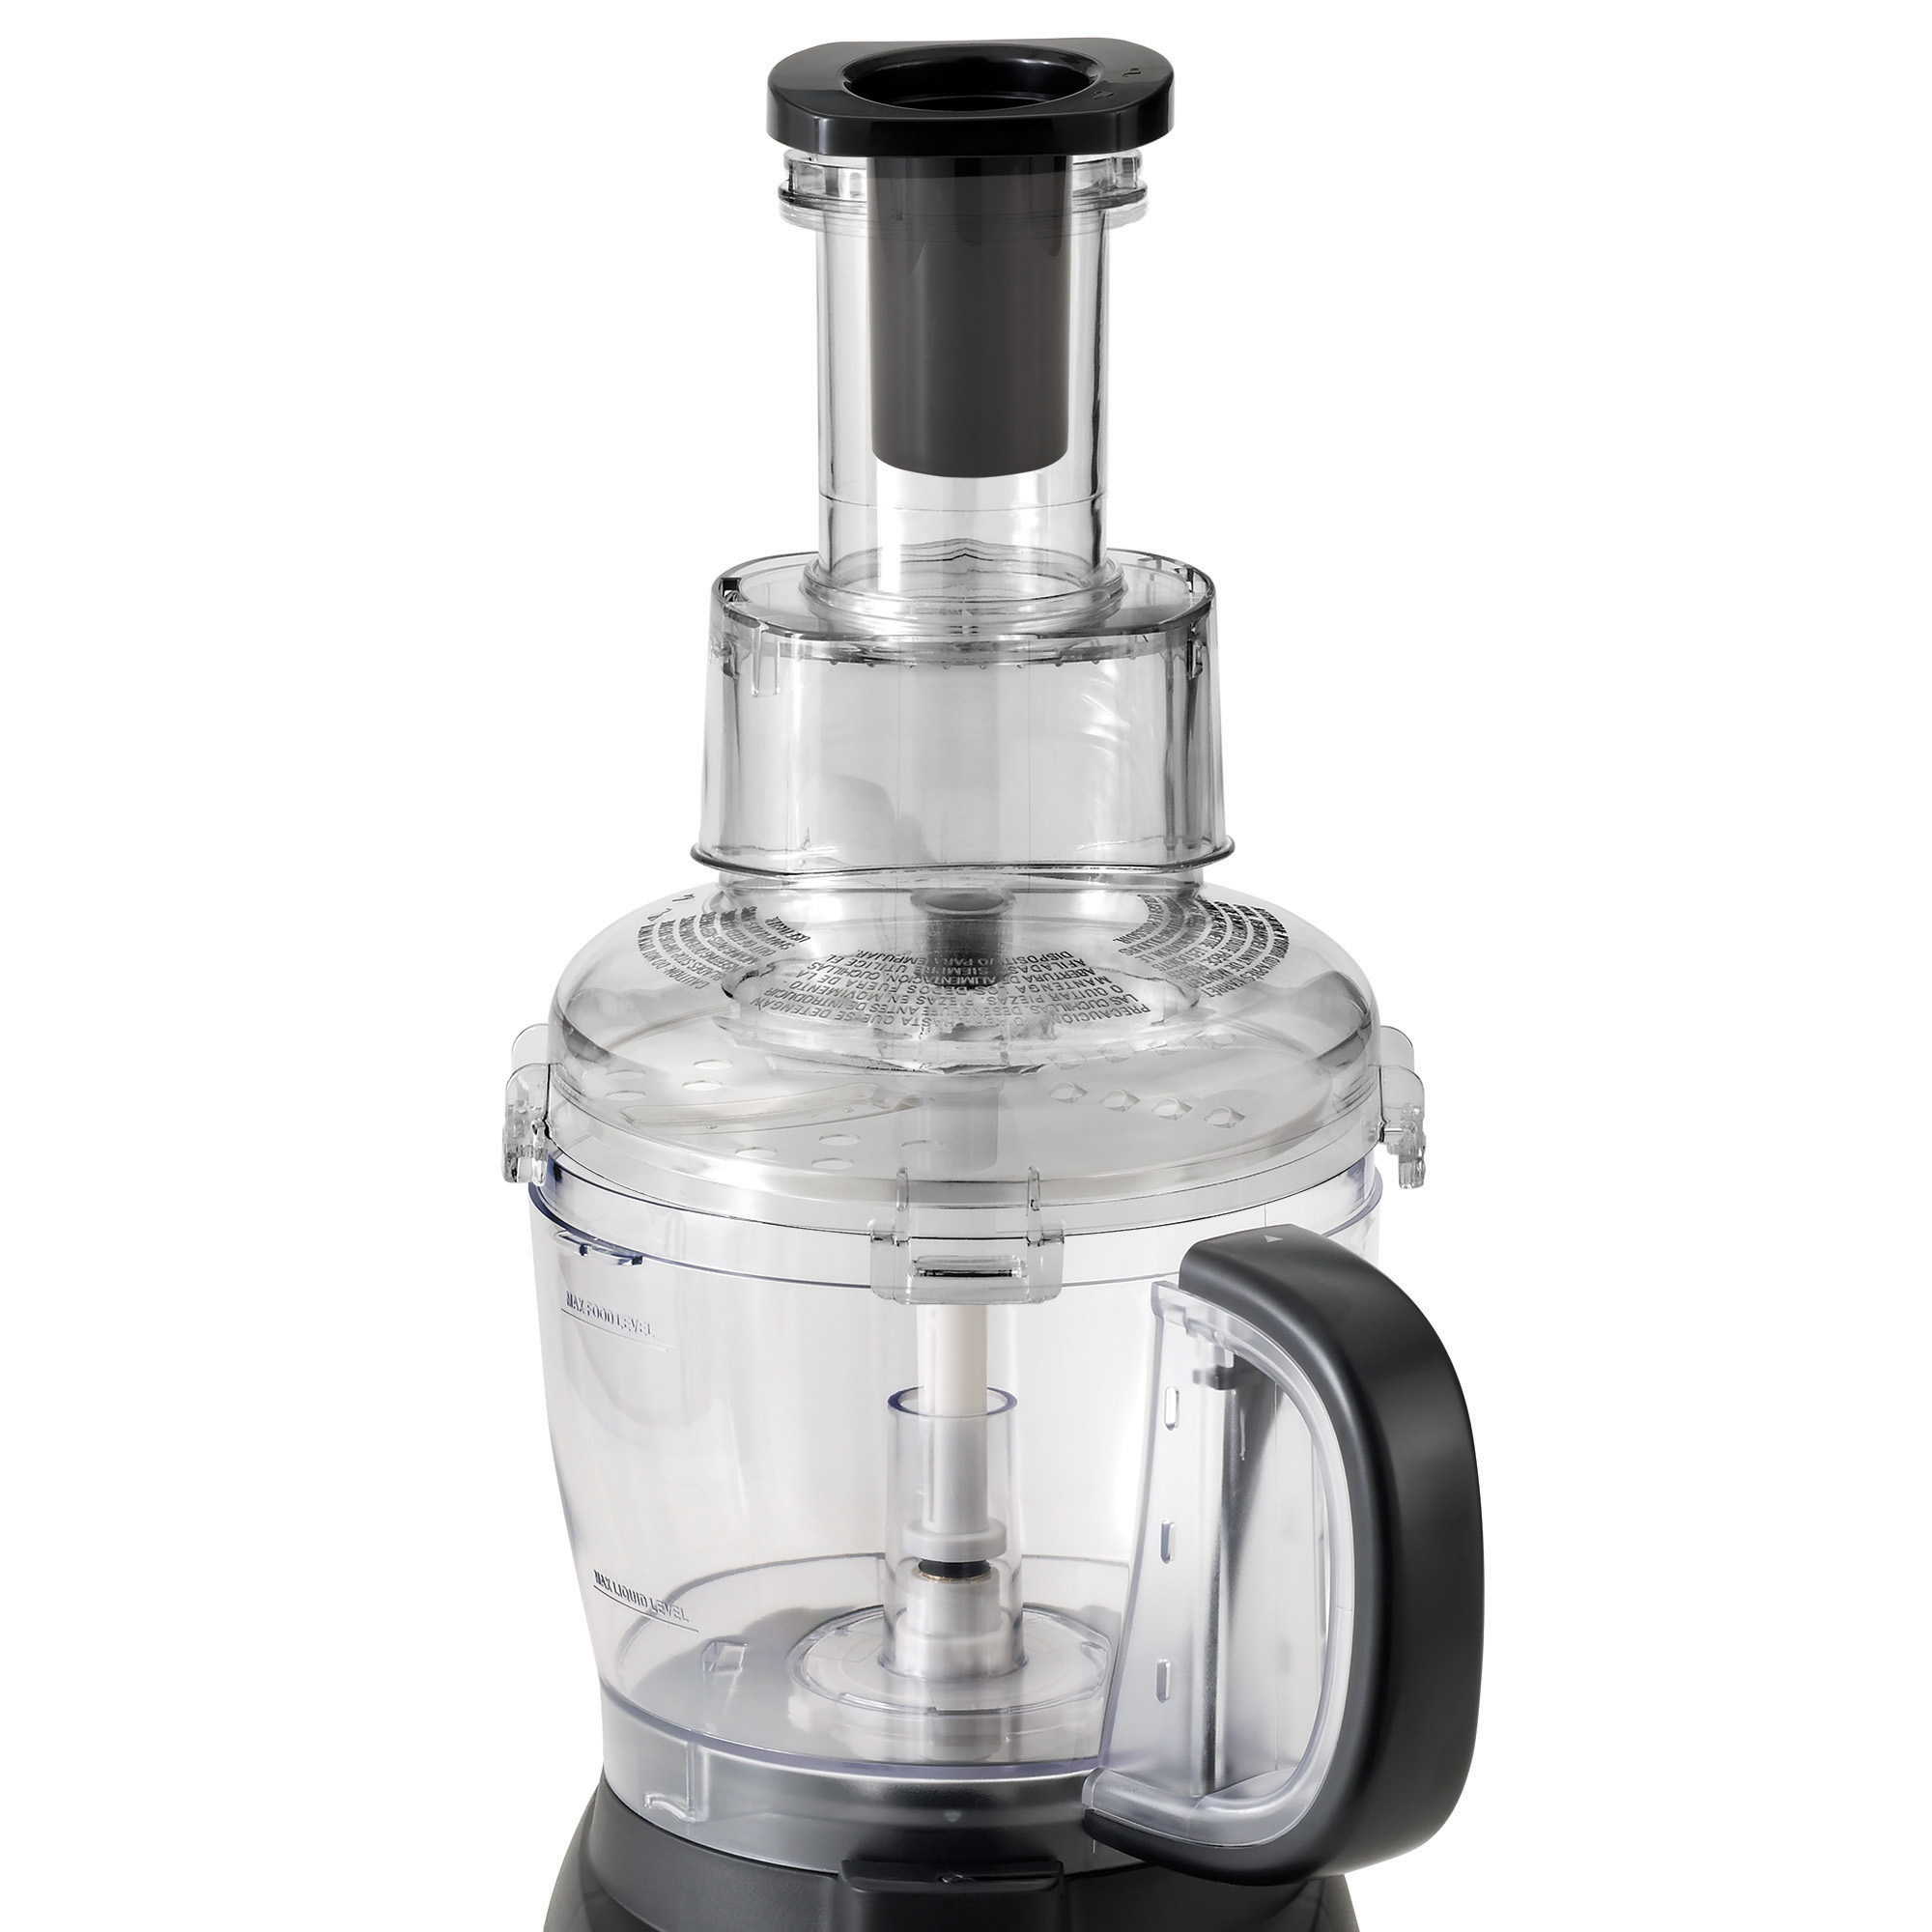 BLACK+DECKER Power Pro 10-Cup Wide-Mouth Food Processor, Black, FP2500B - image 5 of 7